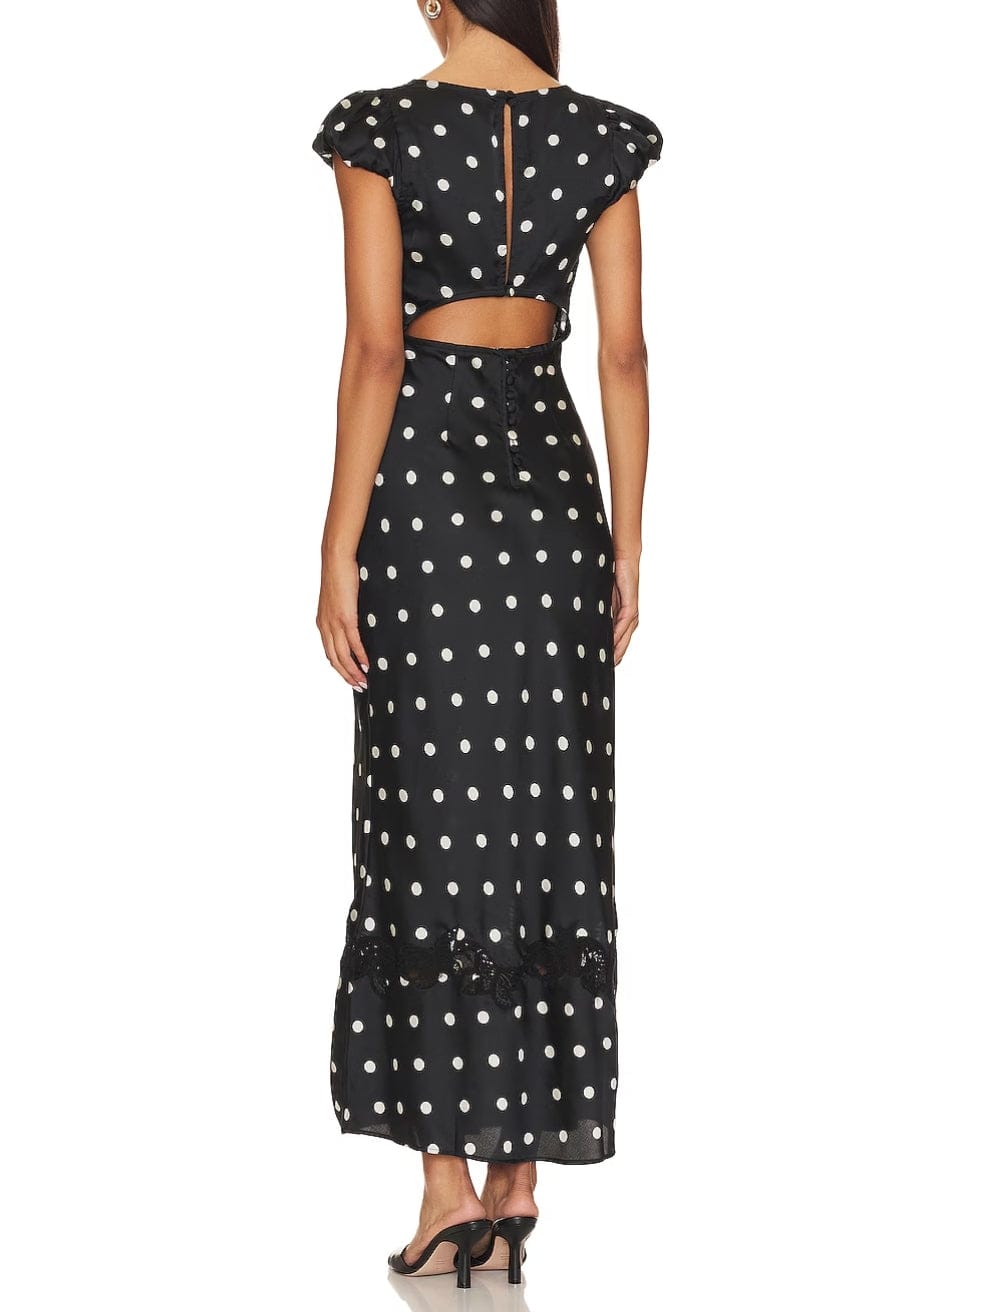 Butterfly Babe Maxi Dress in Black and White Combo